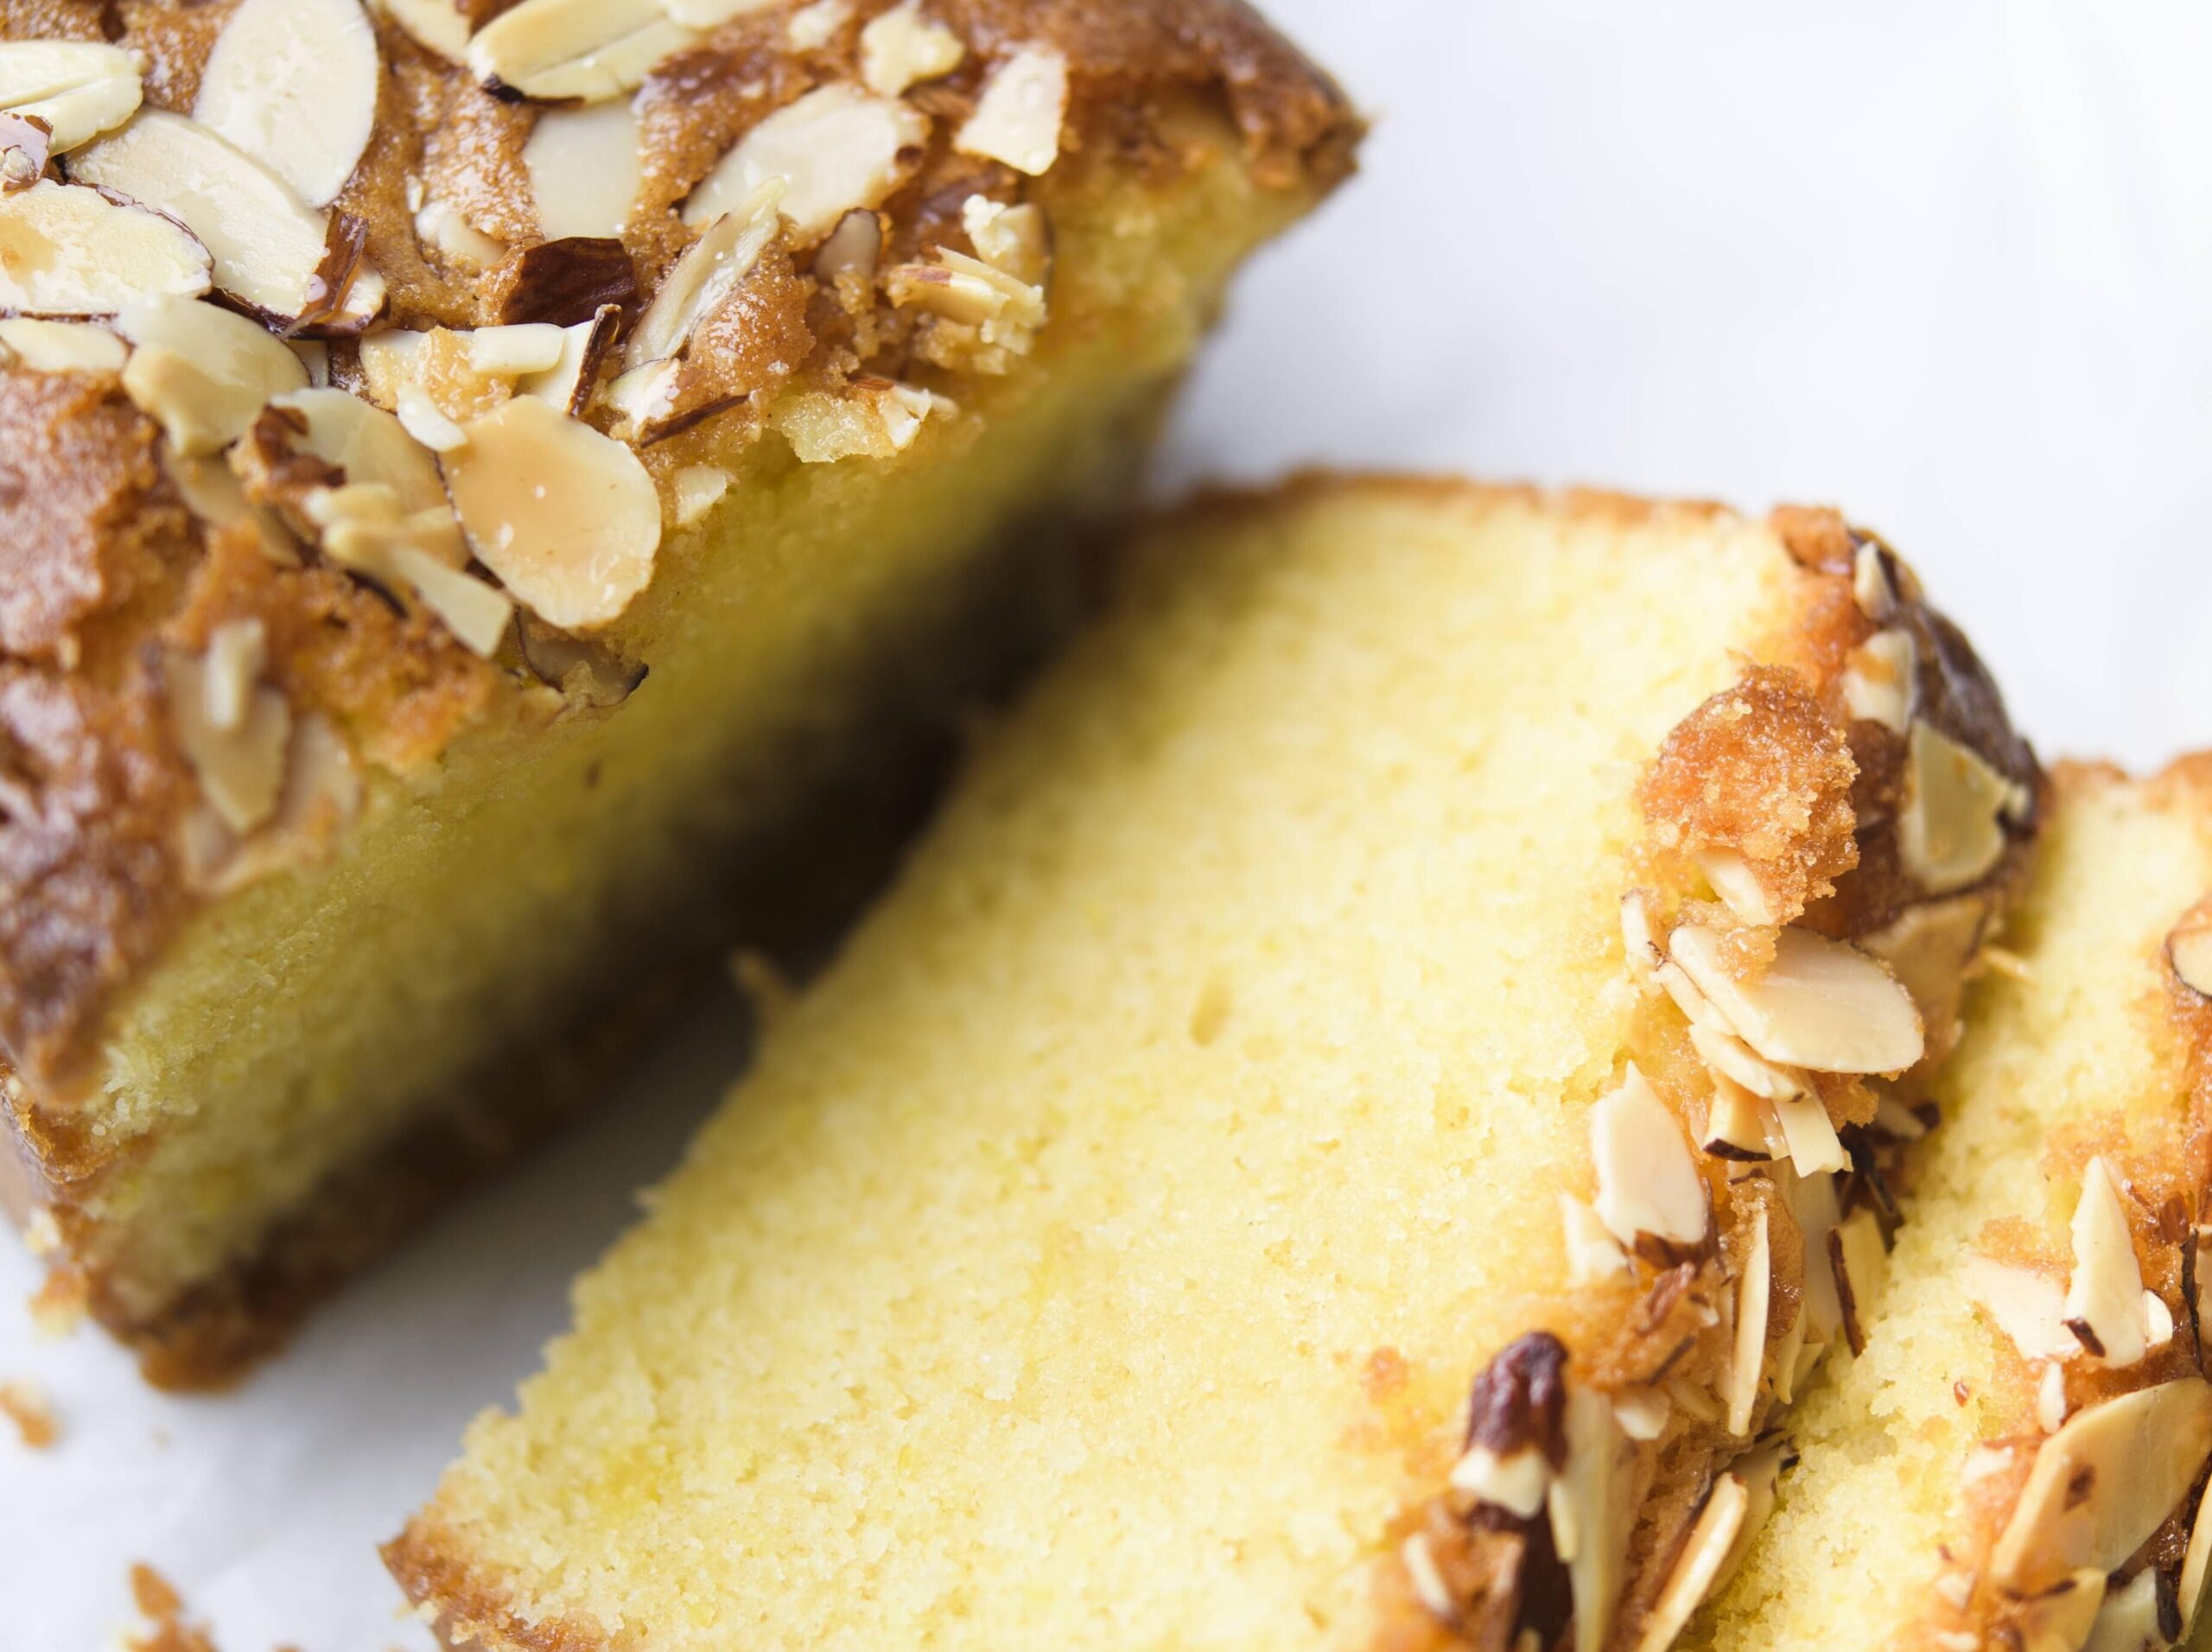 Delight Your Taste Buds with Almond-Rose Pound Cake